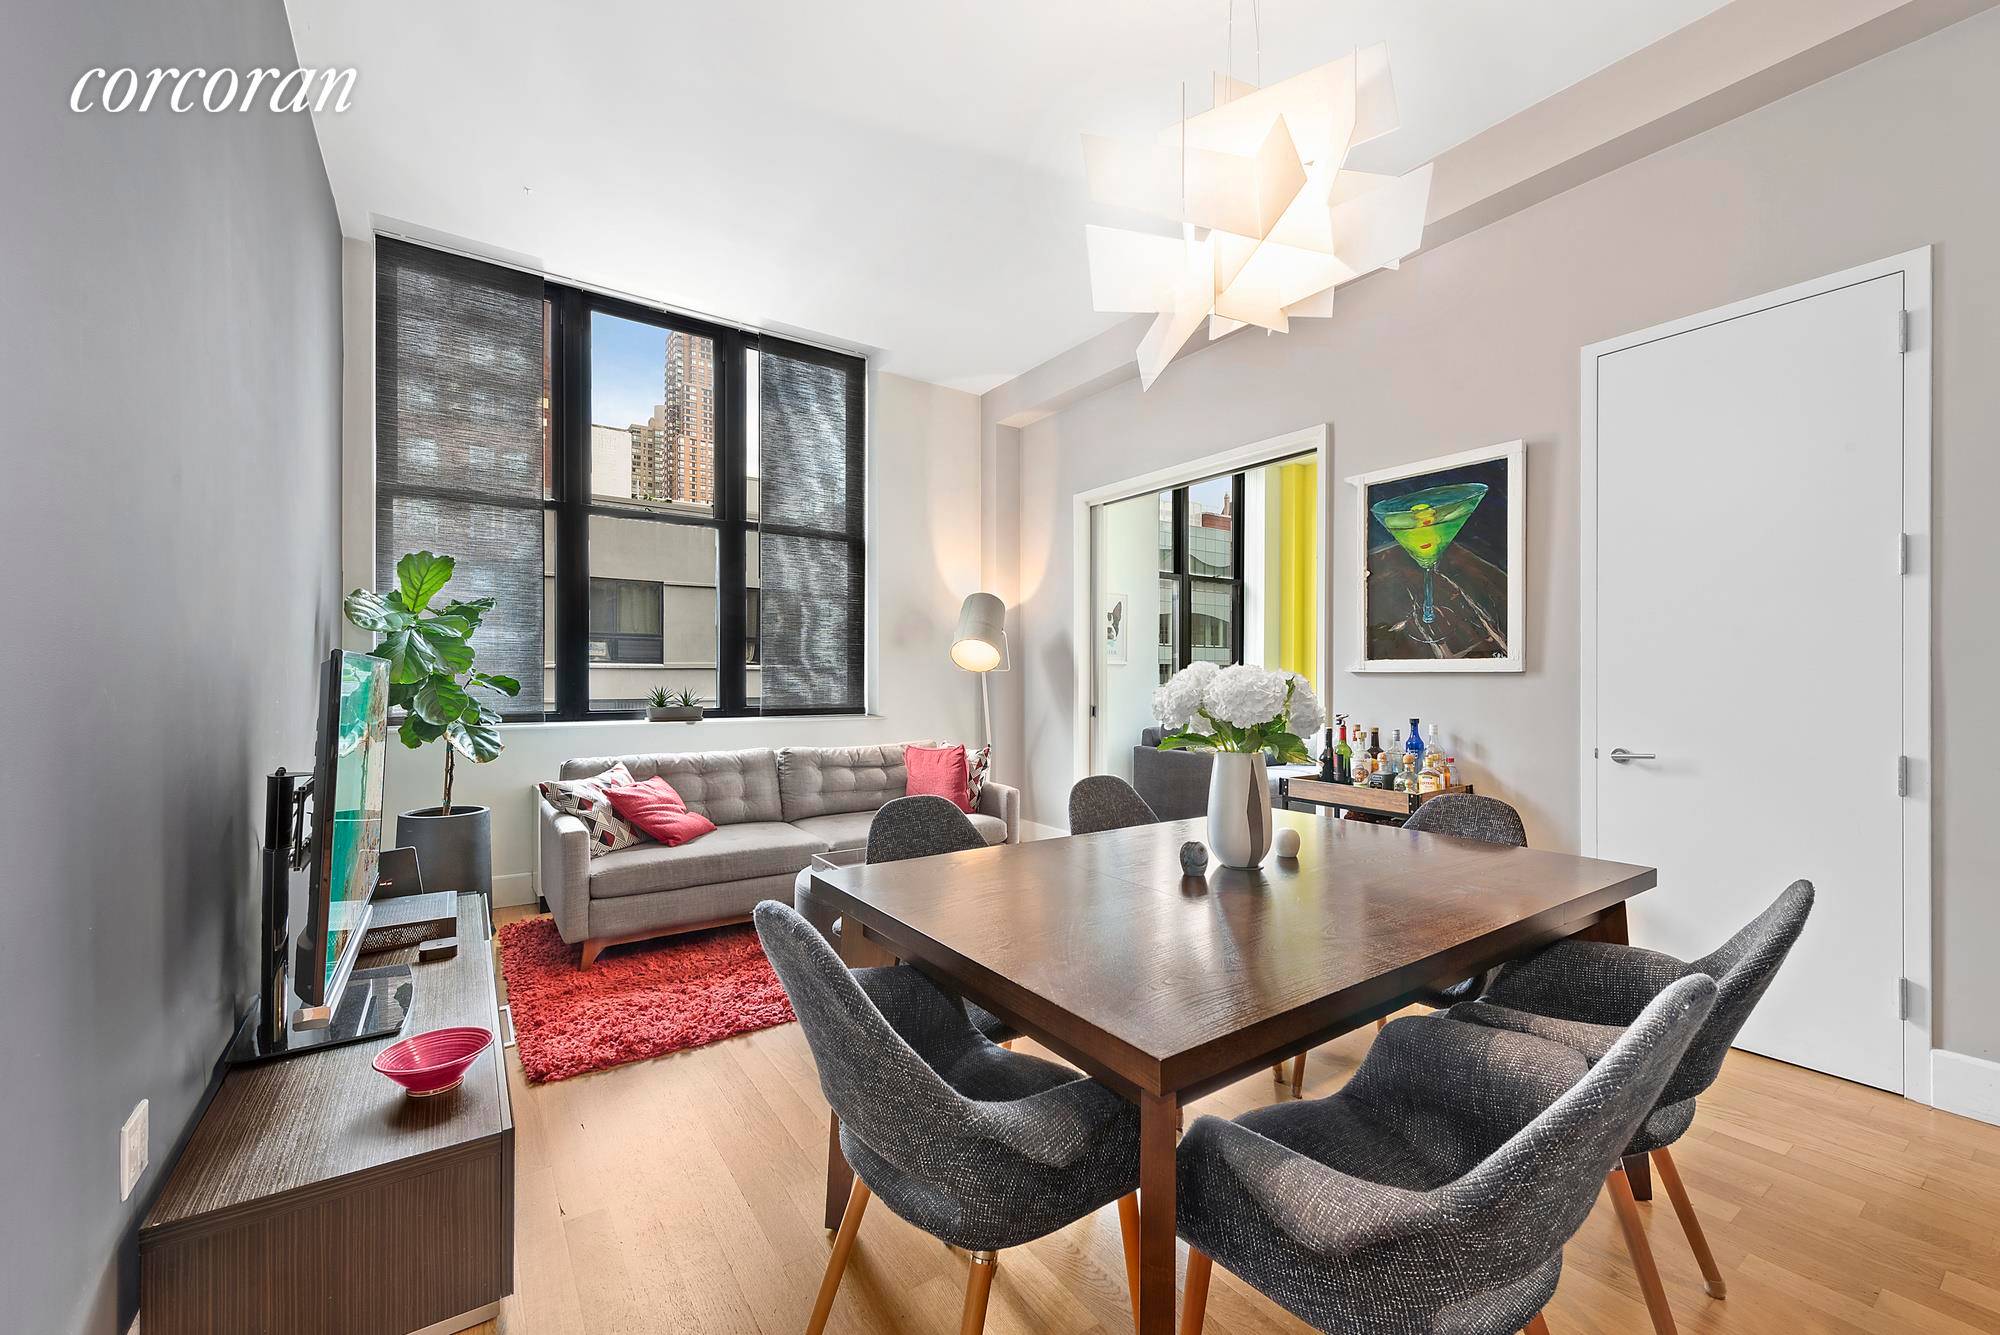 Once a legendary recording studio, The Hit Factory at 421 West 54th Street has been re imagined as a boutique luxury 27 unit condominium in the heart of Hell's Kitchen ...